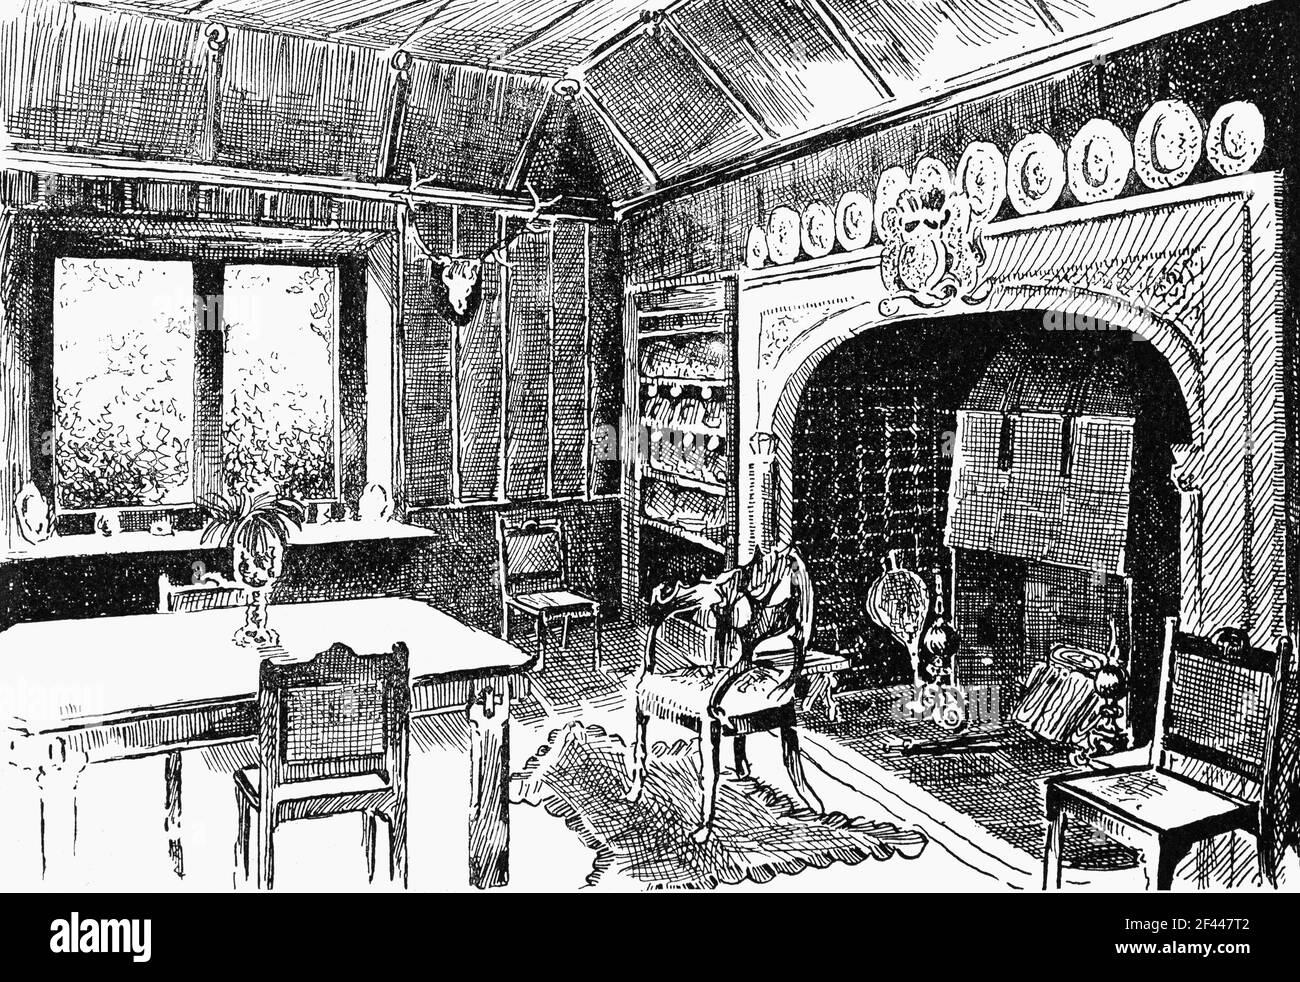 A 19th Century sketch a room in Ross Castle, a 15th-century tower house and keep on the edge of Lough Leane, in Killarney National Park, County Kerry, Ireland. The ancestral home of the Chiefs of the Clan O'Donoghue it was amongst the last to surrender to Oliver Cromwell's Roundheads during the Irish Confederate Wars. The castle became a military barracks, which remained so until early in the 19th century, after which in fell into ruin. Stock Photo